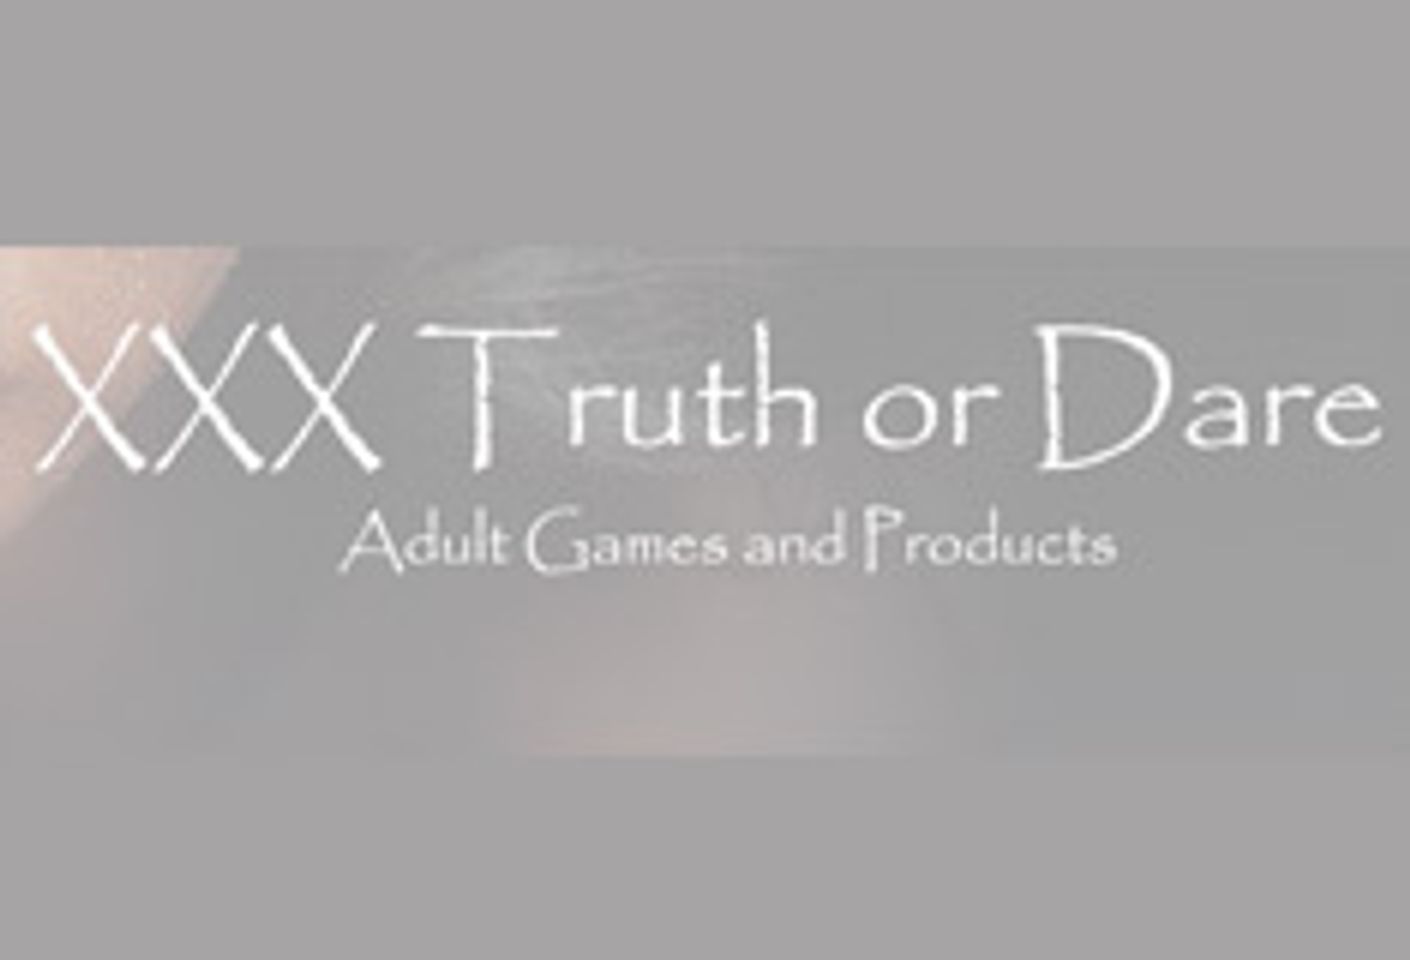 XXX Truth or Dare Announces Savings for U.S. Customers